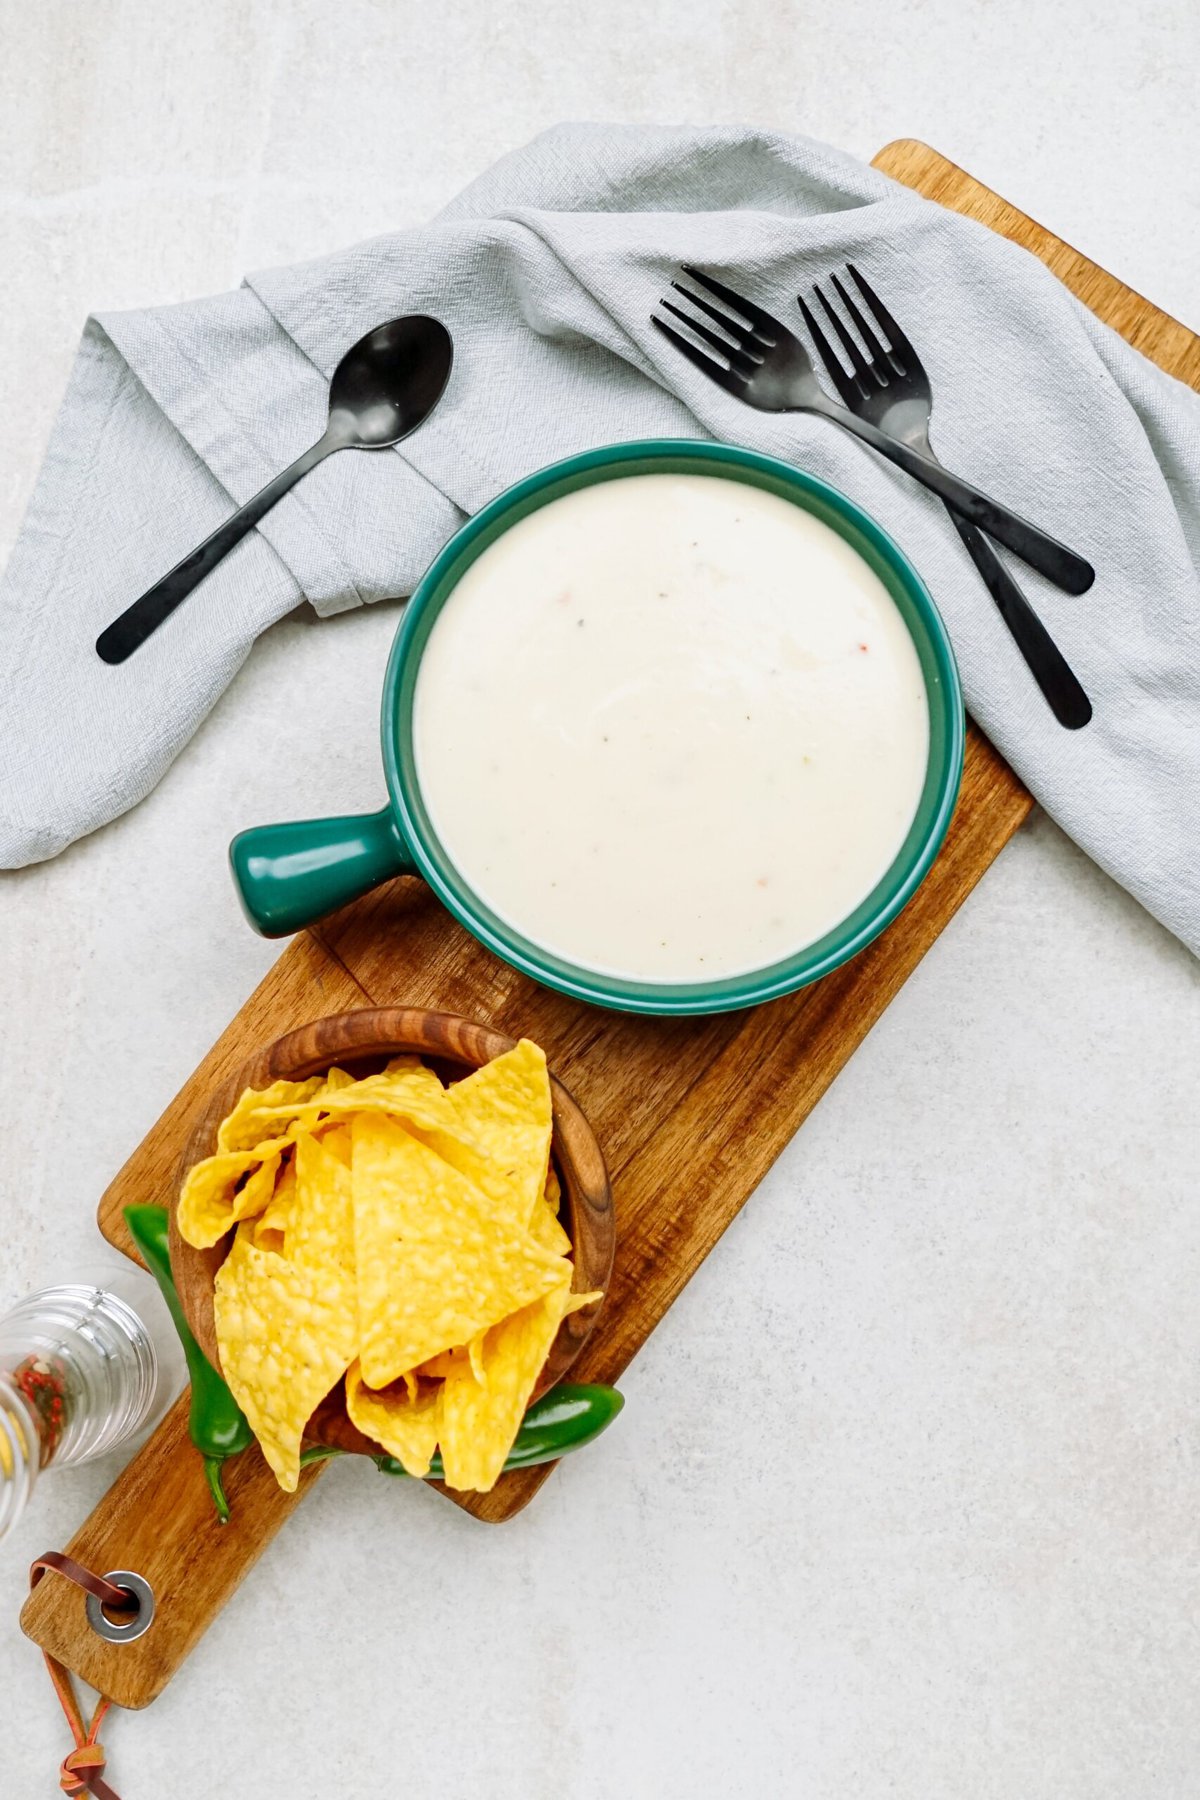 A bowl of creamy white queso dip with a side of tortilla chips is on a wooden serving board. Nearby are two black forks, a black spoon, and a gray napkin.